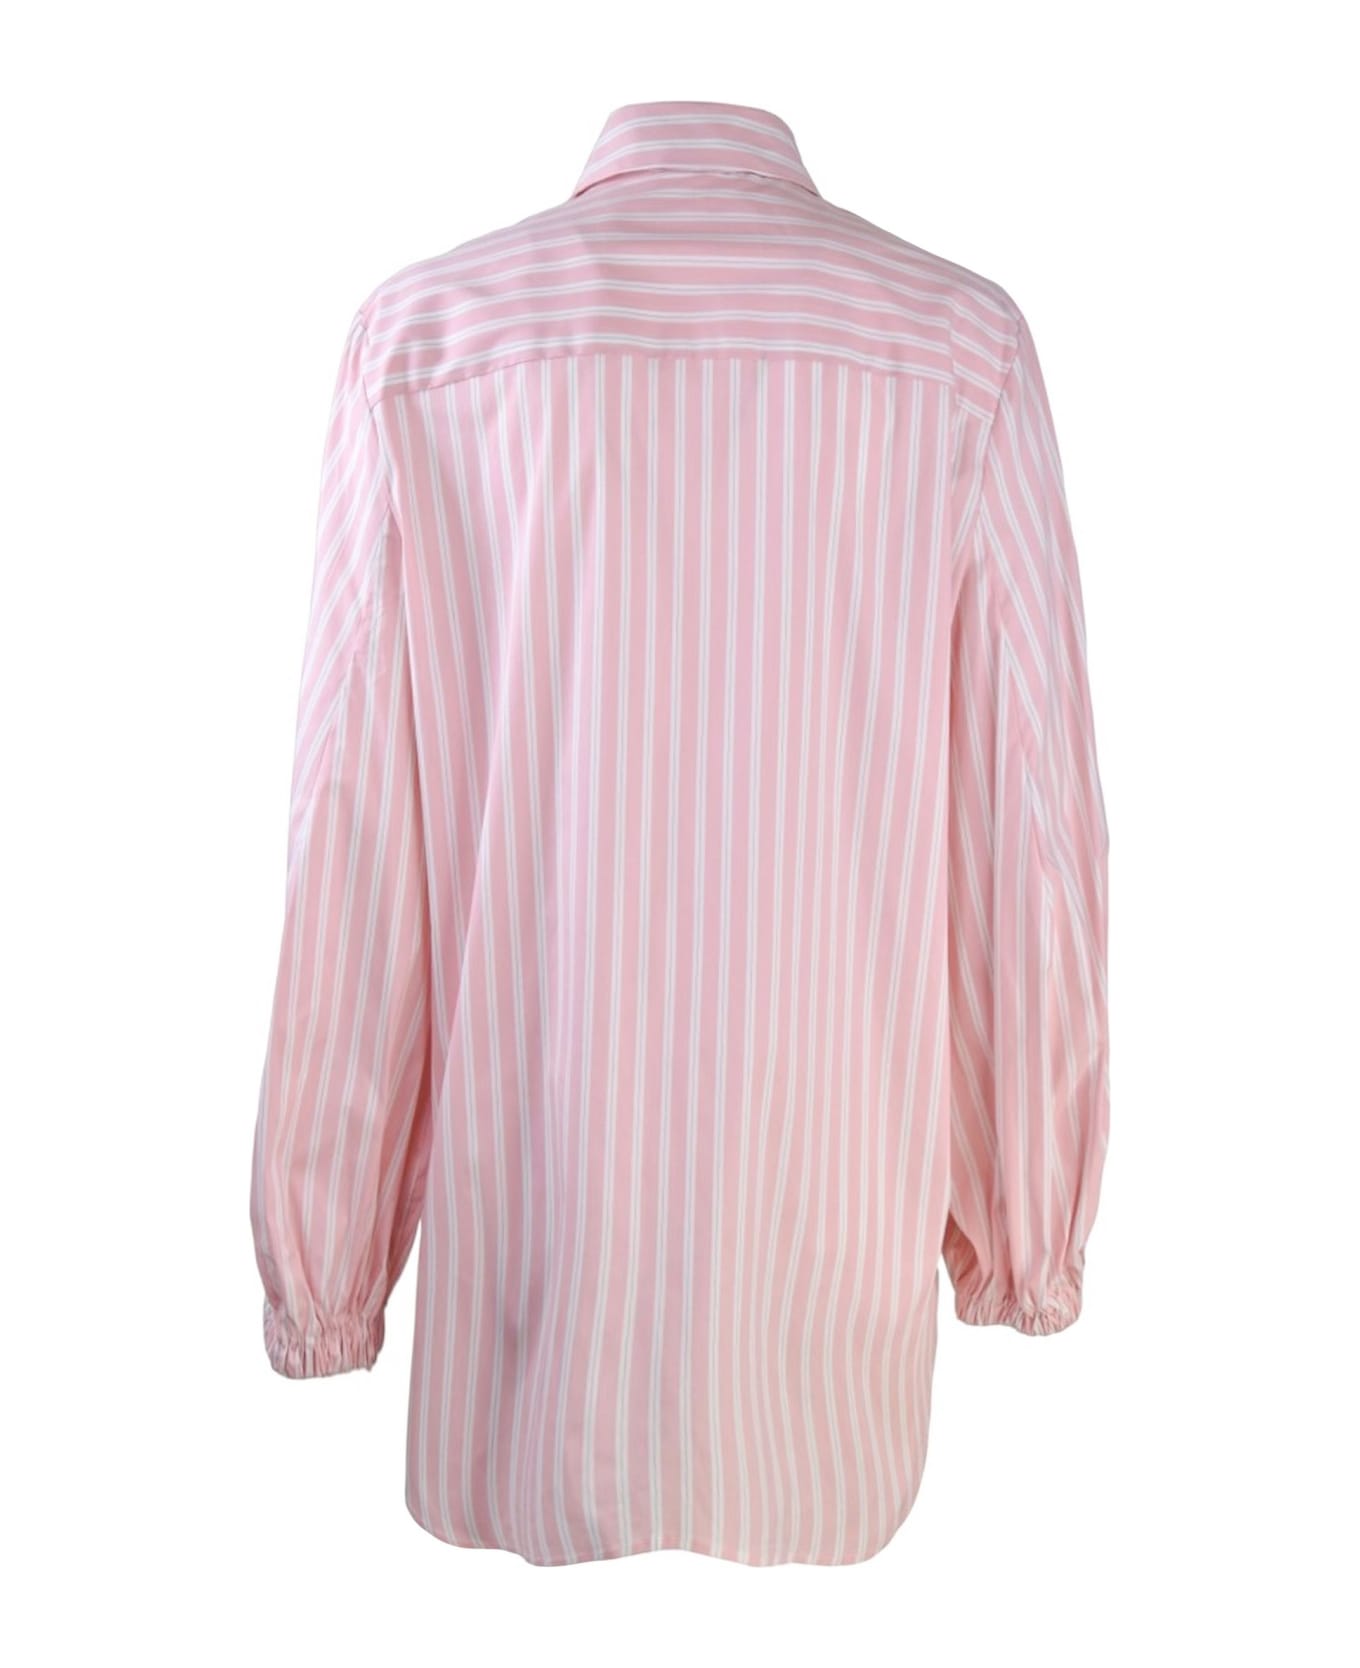 SEMICOUTURE Striped Cotton Shirt - Pink